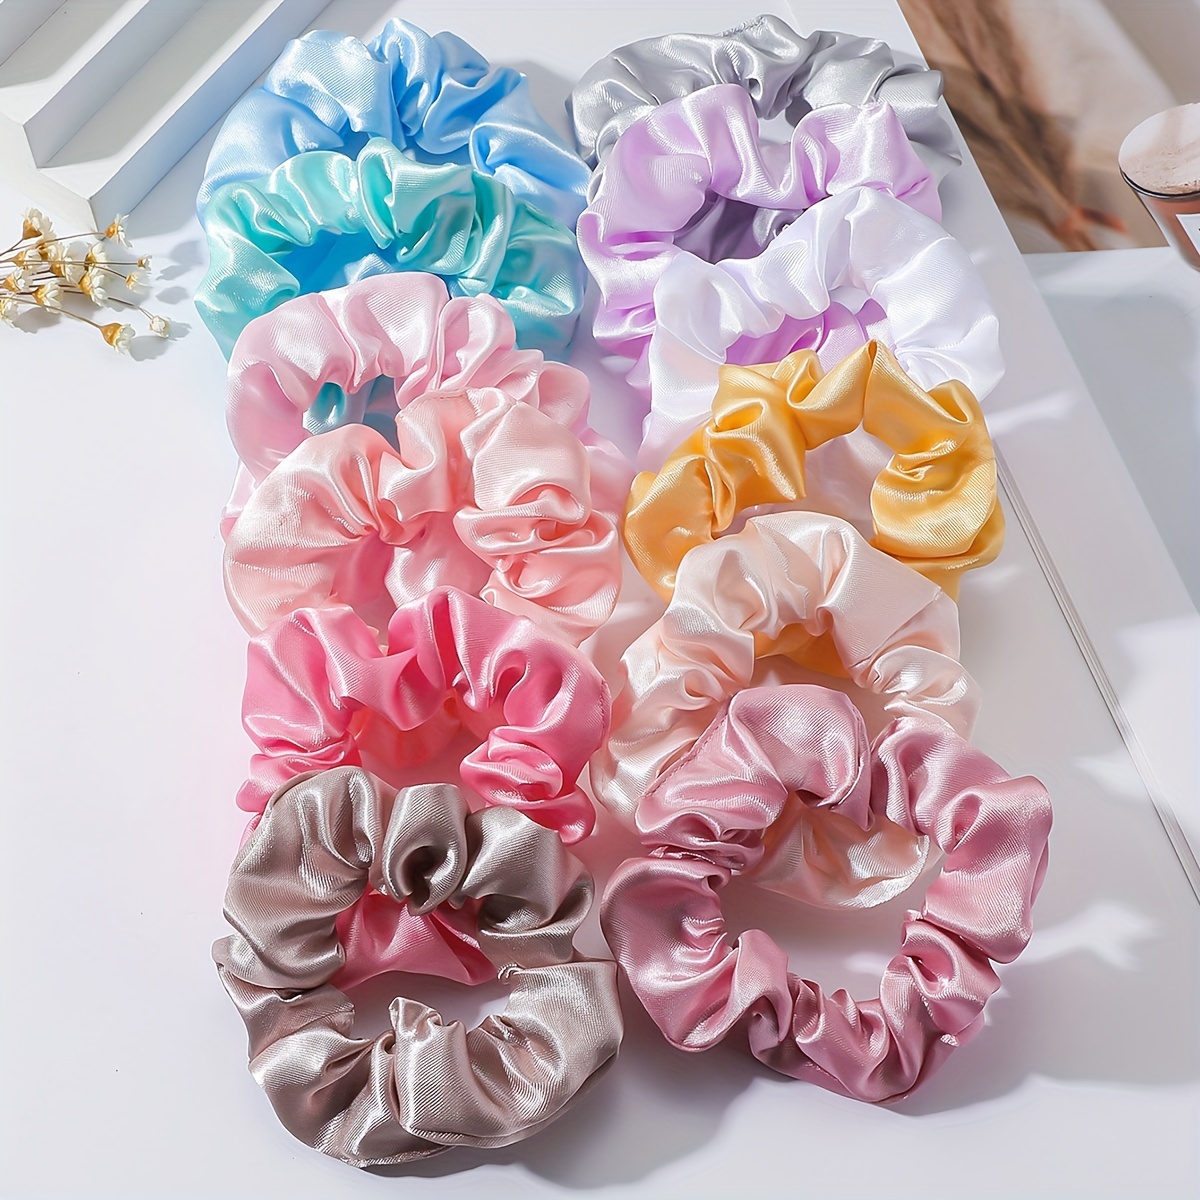 

12pcs Large Intestine Hair Loops Elastic Hair Ties Ponytail Holders Trendy Hair Accessories For Women And Daily Uses